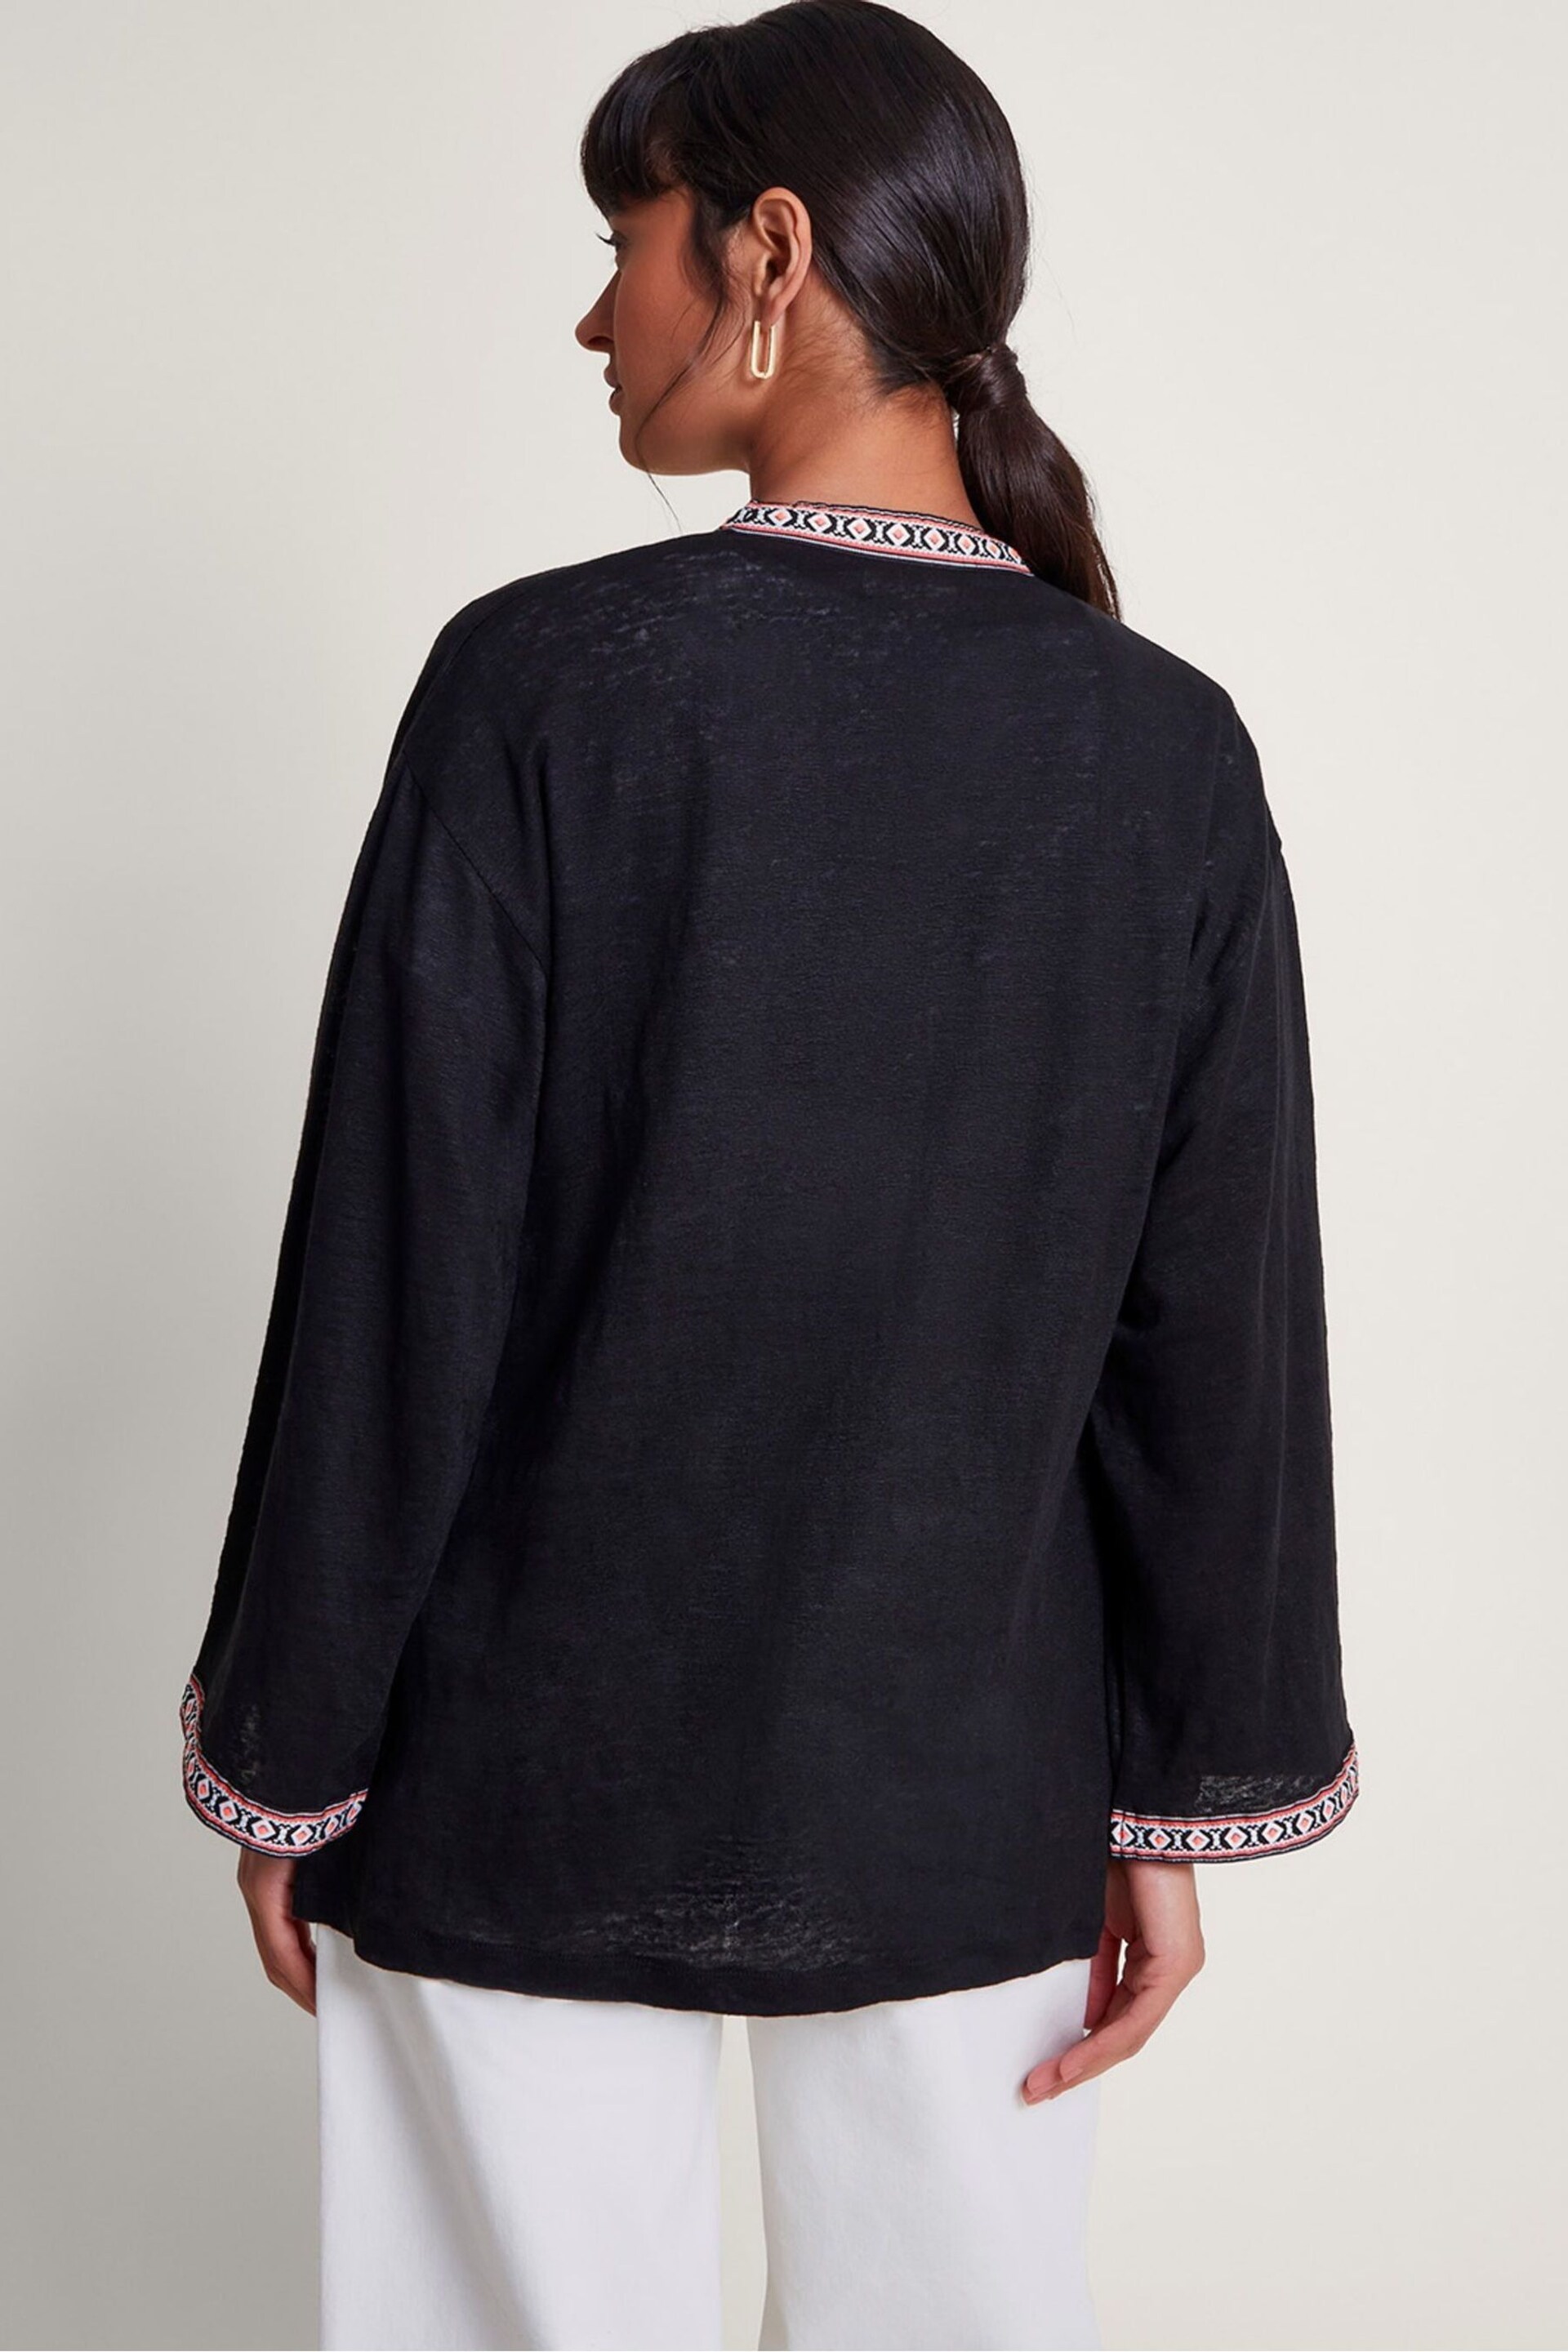 Monsoon Black Linen Cora Cover-Up - Image 3 of 5